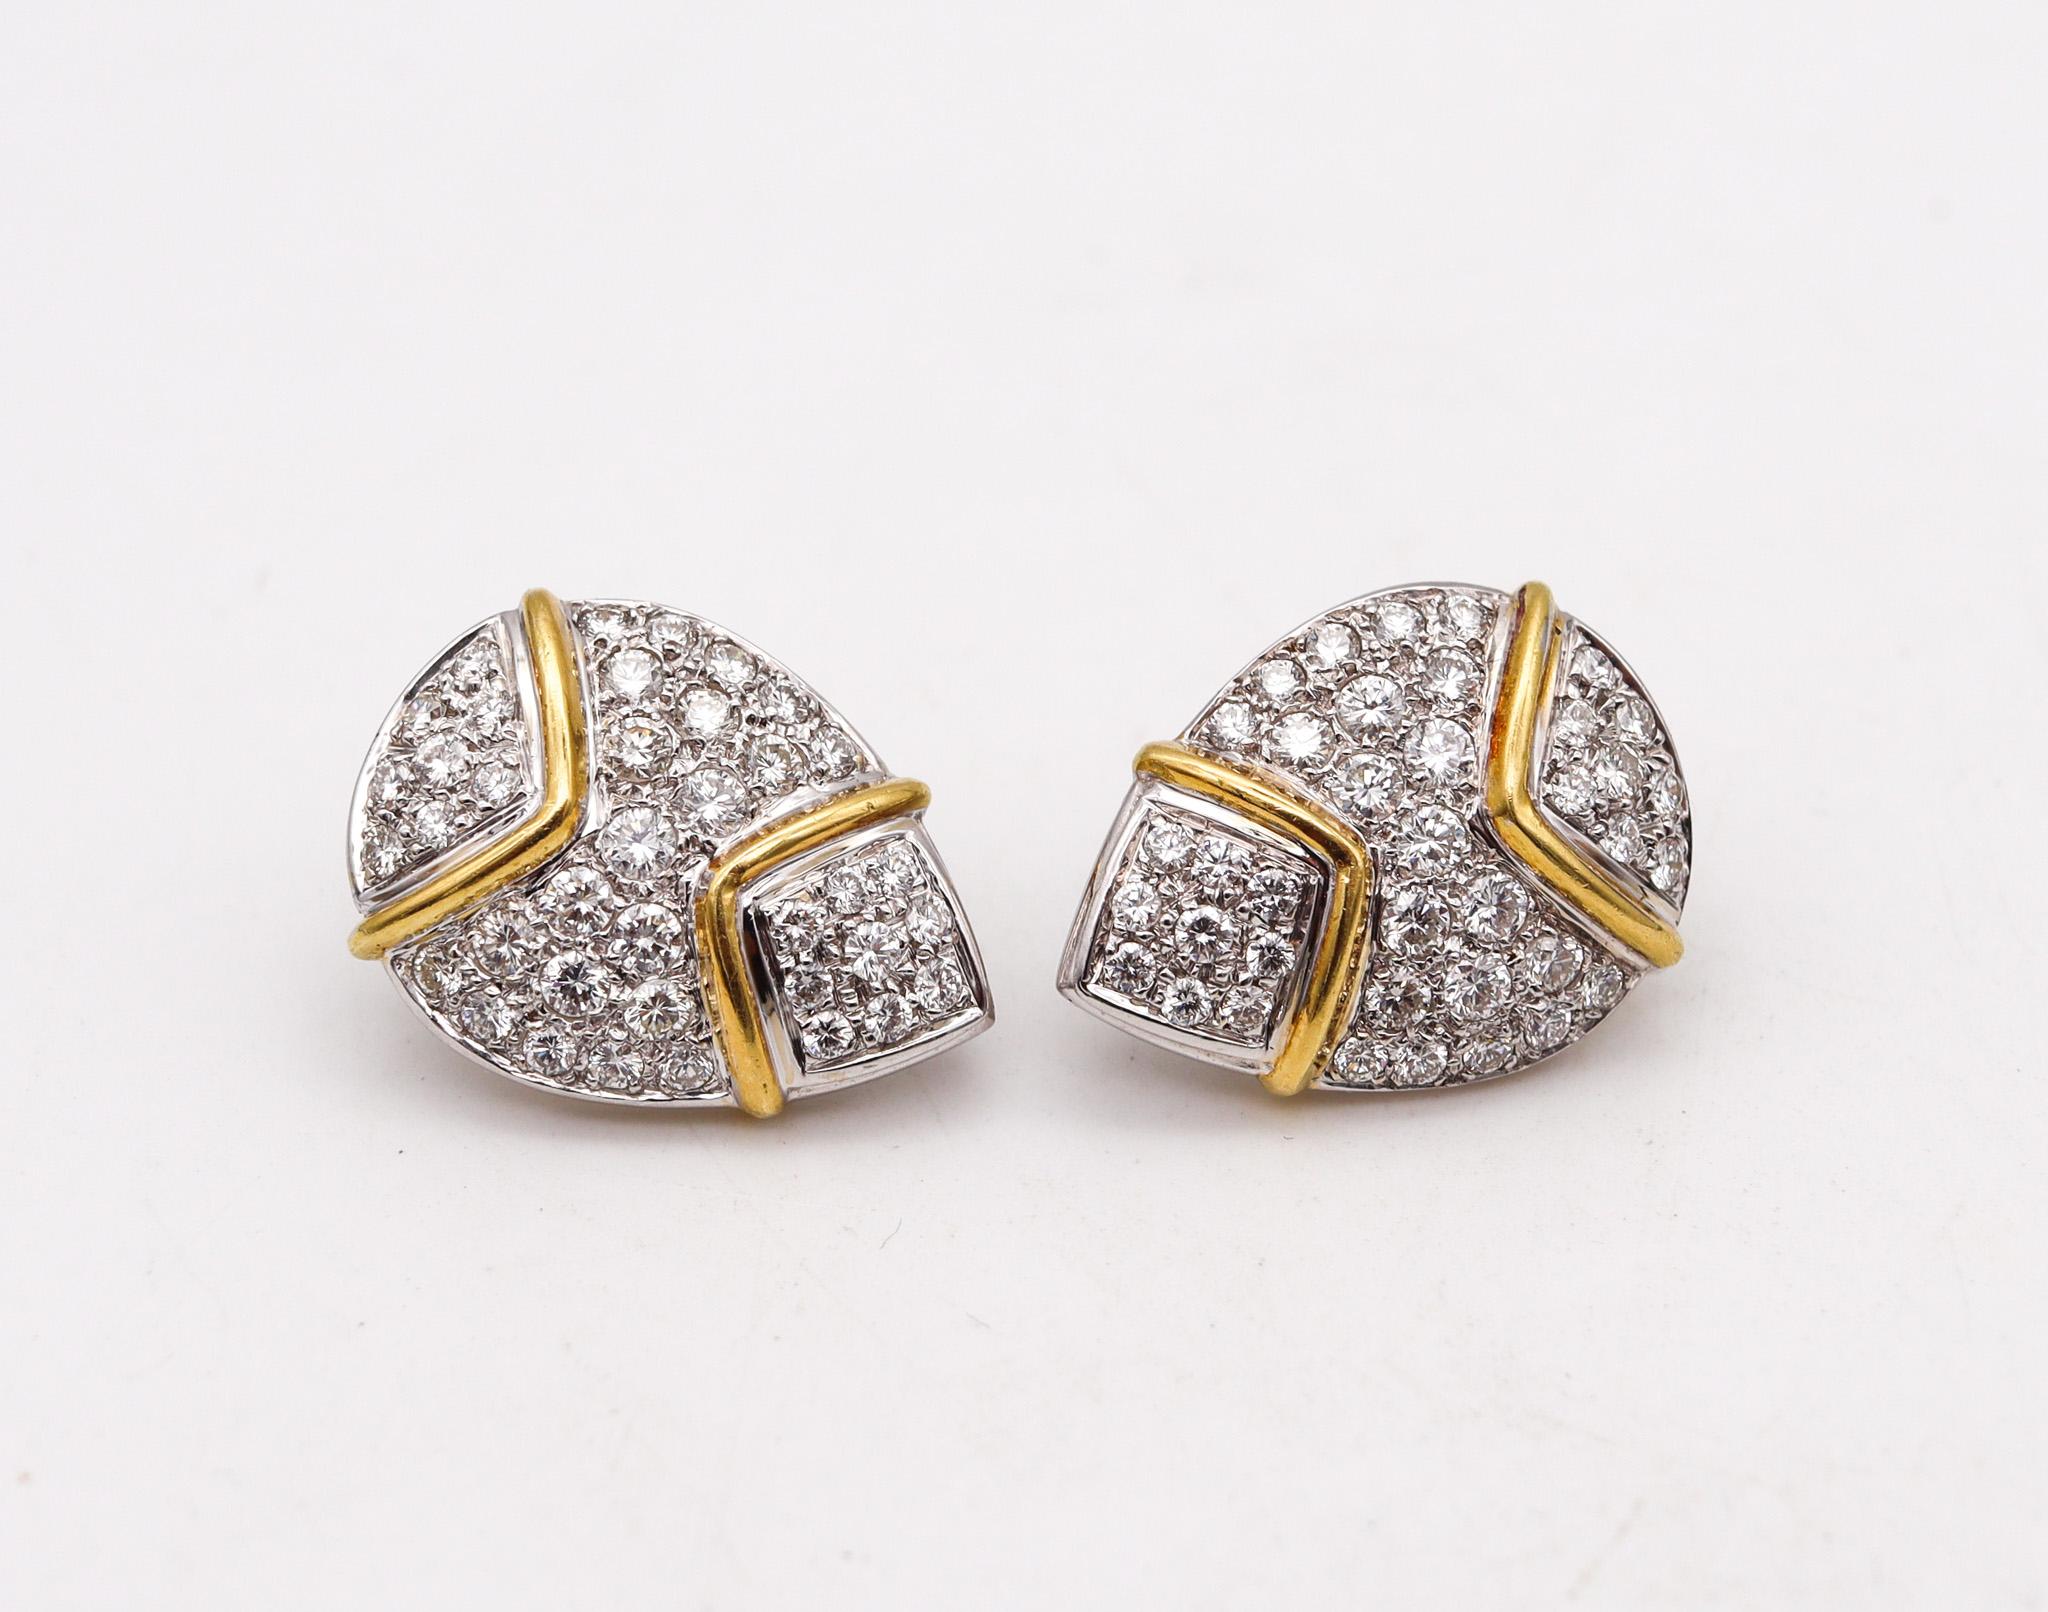 Modernist earrings designed by the Hammerman Brothers.

Gorgeous modernist pair of earrings, created by the Hammerman brothers. These pair has been crafted with a pear shape in solid white gold of 18 karats with accents of yellow gold. Fitted with